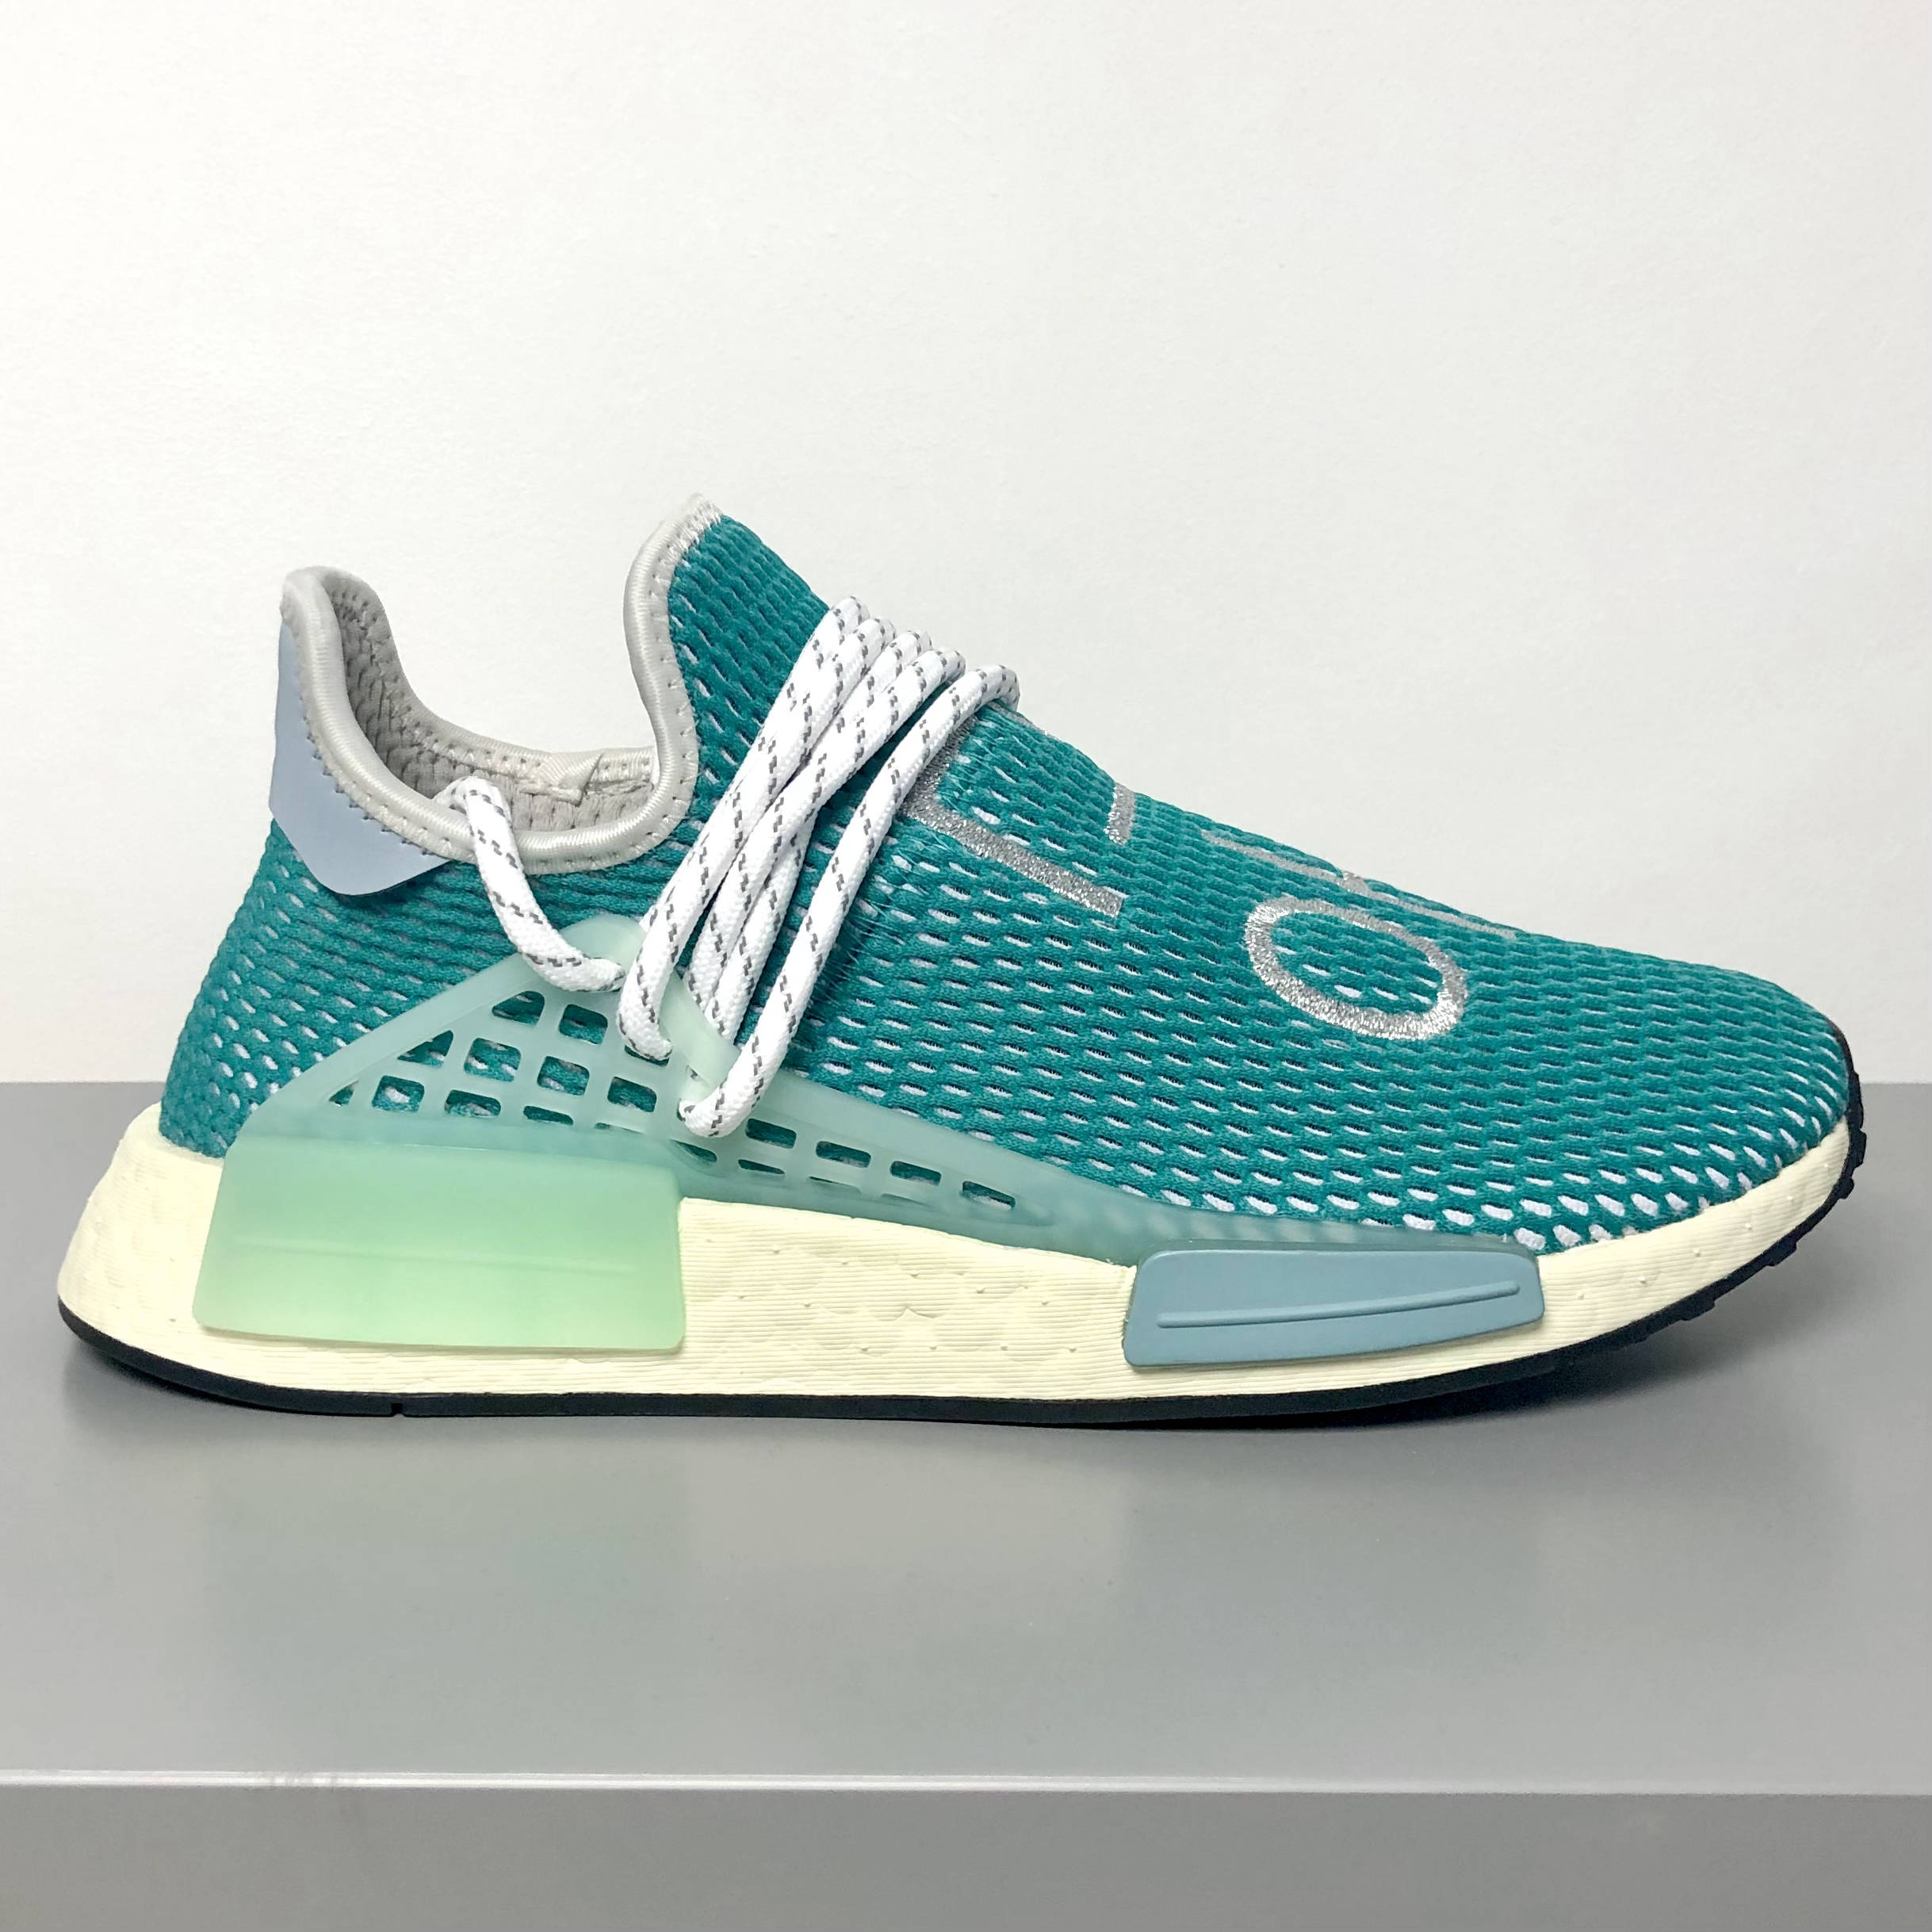 Modern Notoriety on Twitter: "A look at the Pharrell x NMD Hu "Dash Green," reportedly limited to 7777 pairs worldwide https://t.co/VO9Yz9e2Eo https://t.co/FlN5bmfOj7" / X